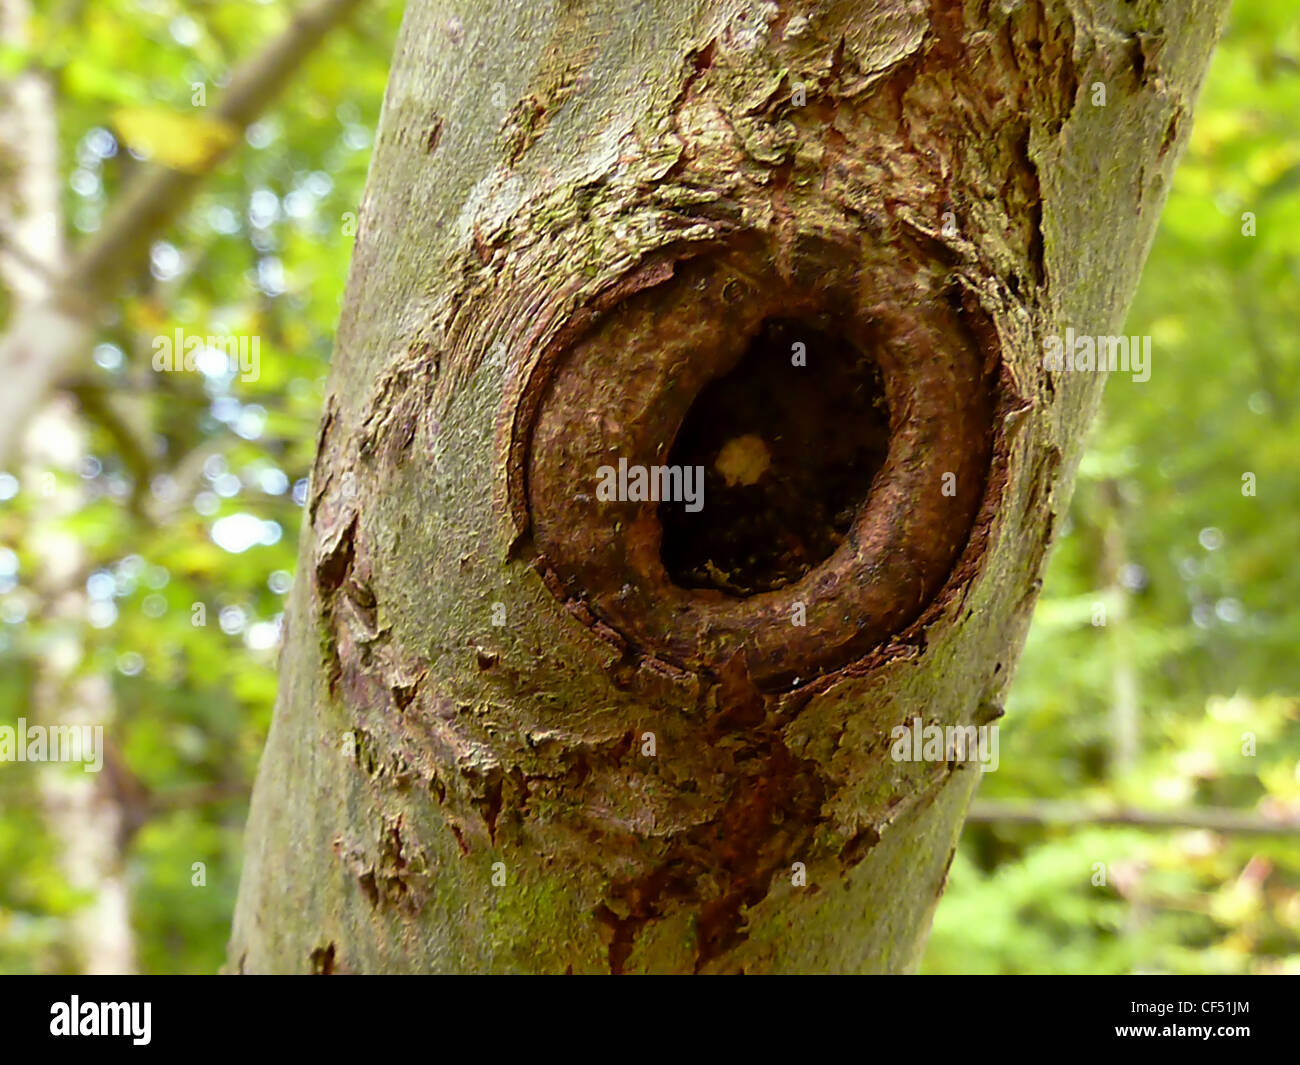 Close up of a node in a trunk with vegetation background Stock Photo